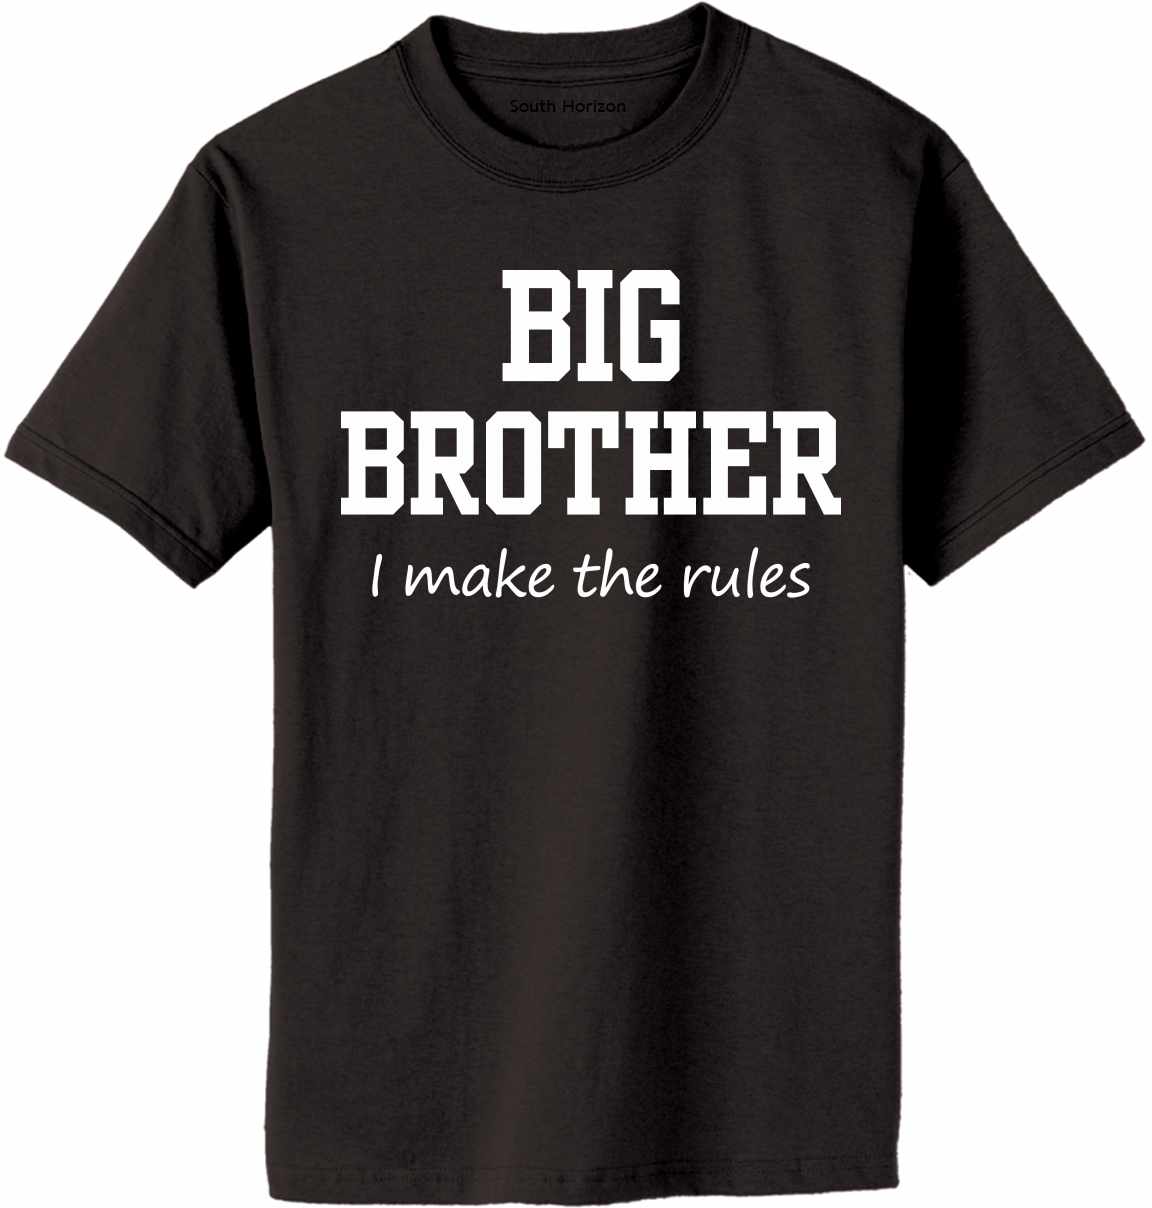 Big Brother - Make Rules on Adult T-Shirt